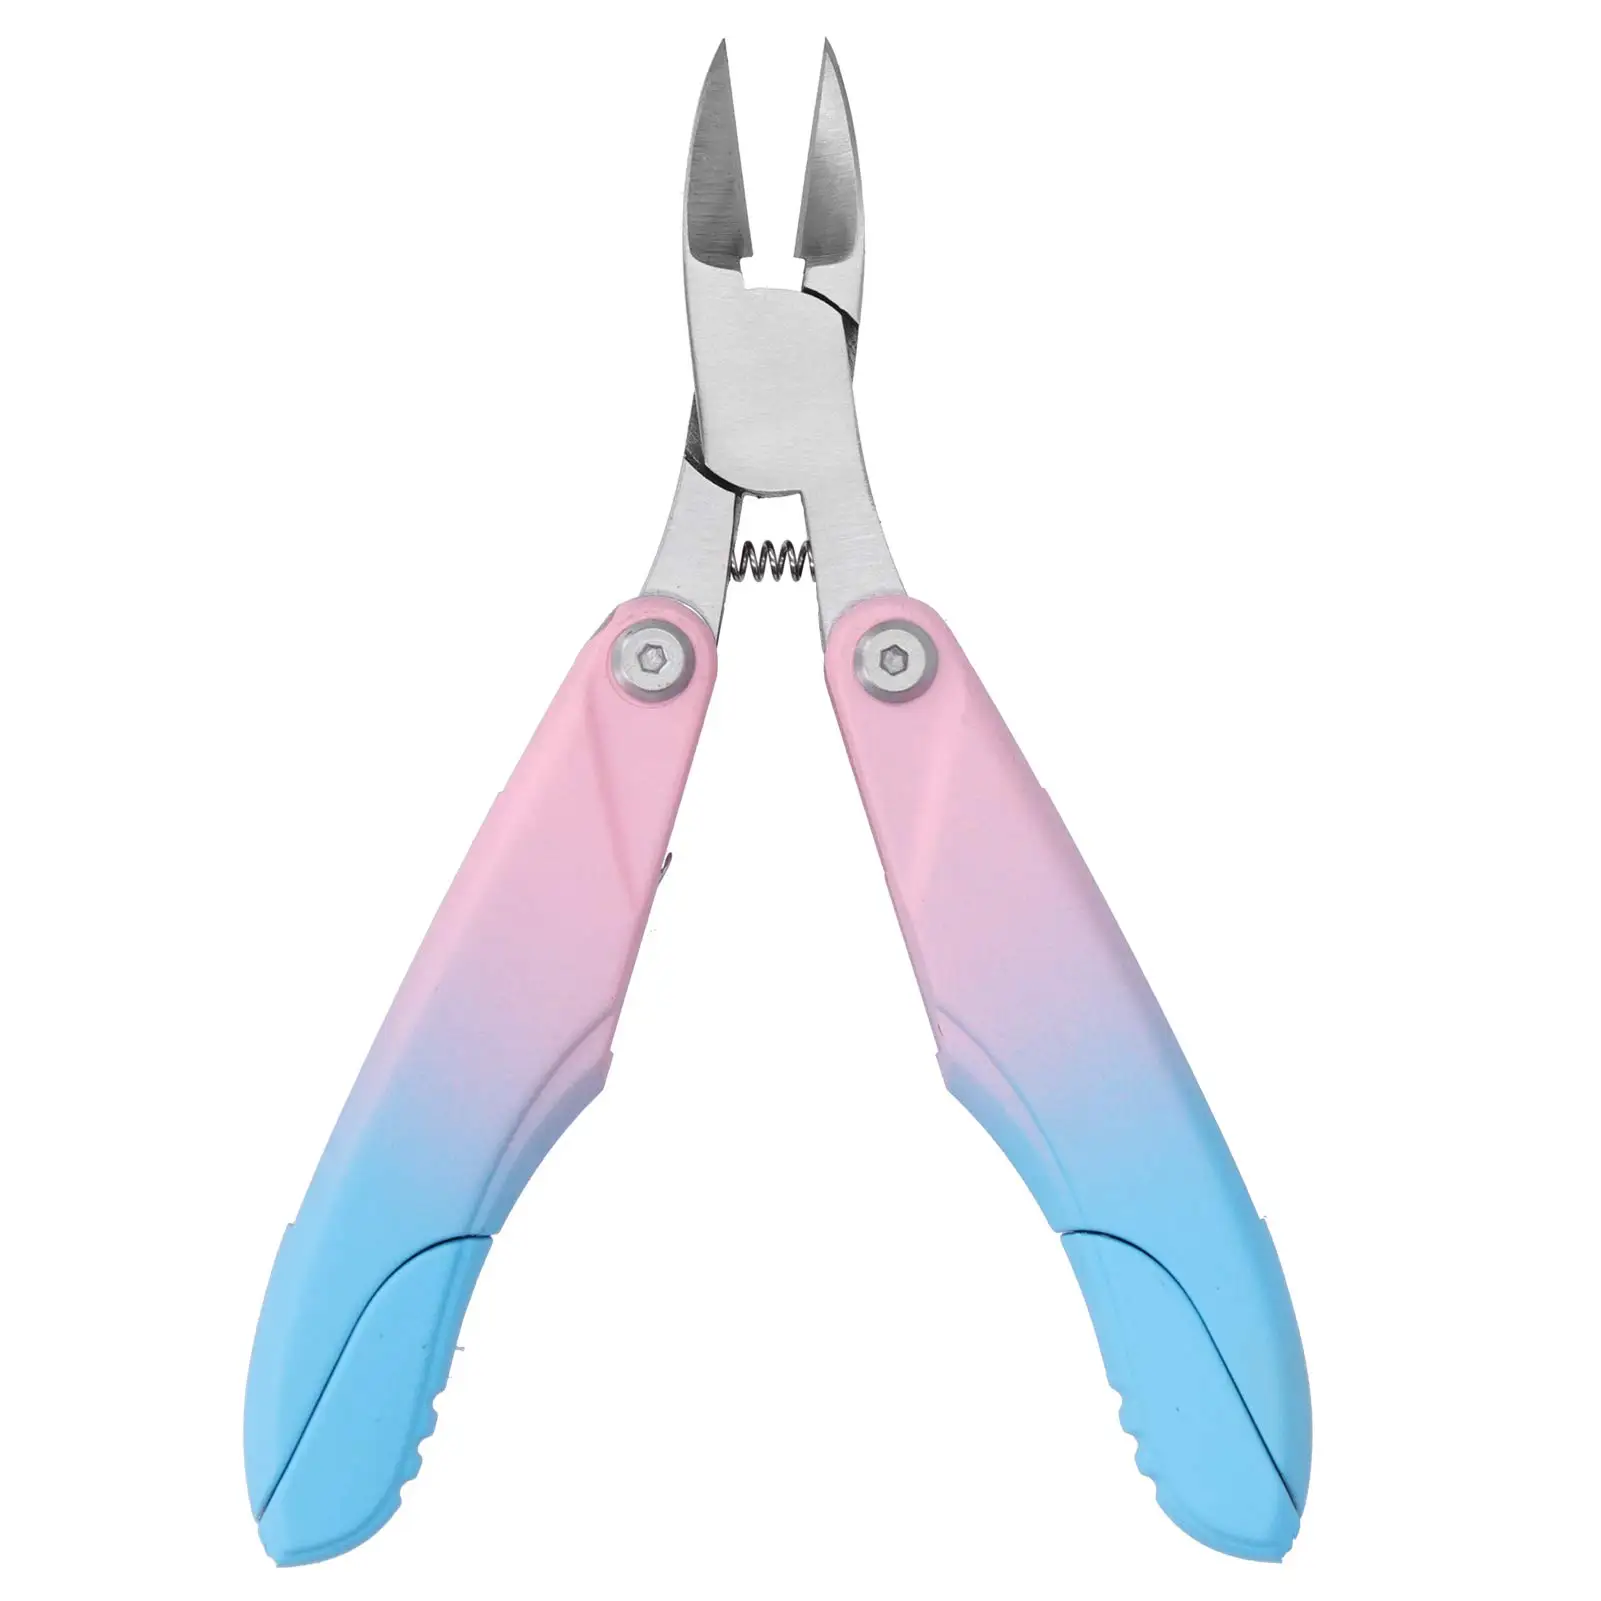 Toe Nail Clipper for Ingrown Thick Toenails Nail Clippers Multifunctional Folding Olecranon Arch Ingrown Pliers for Paronychia